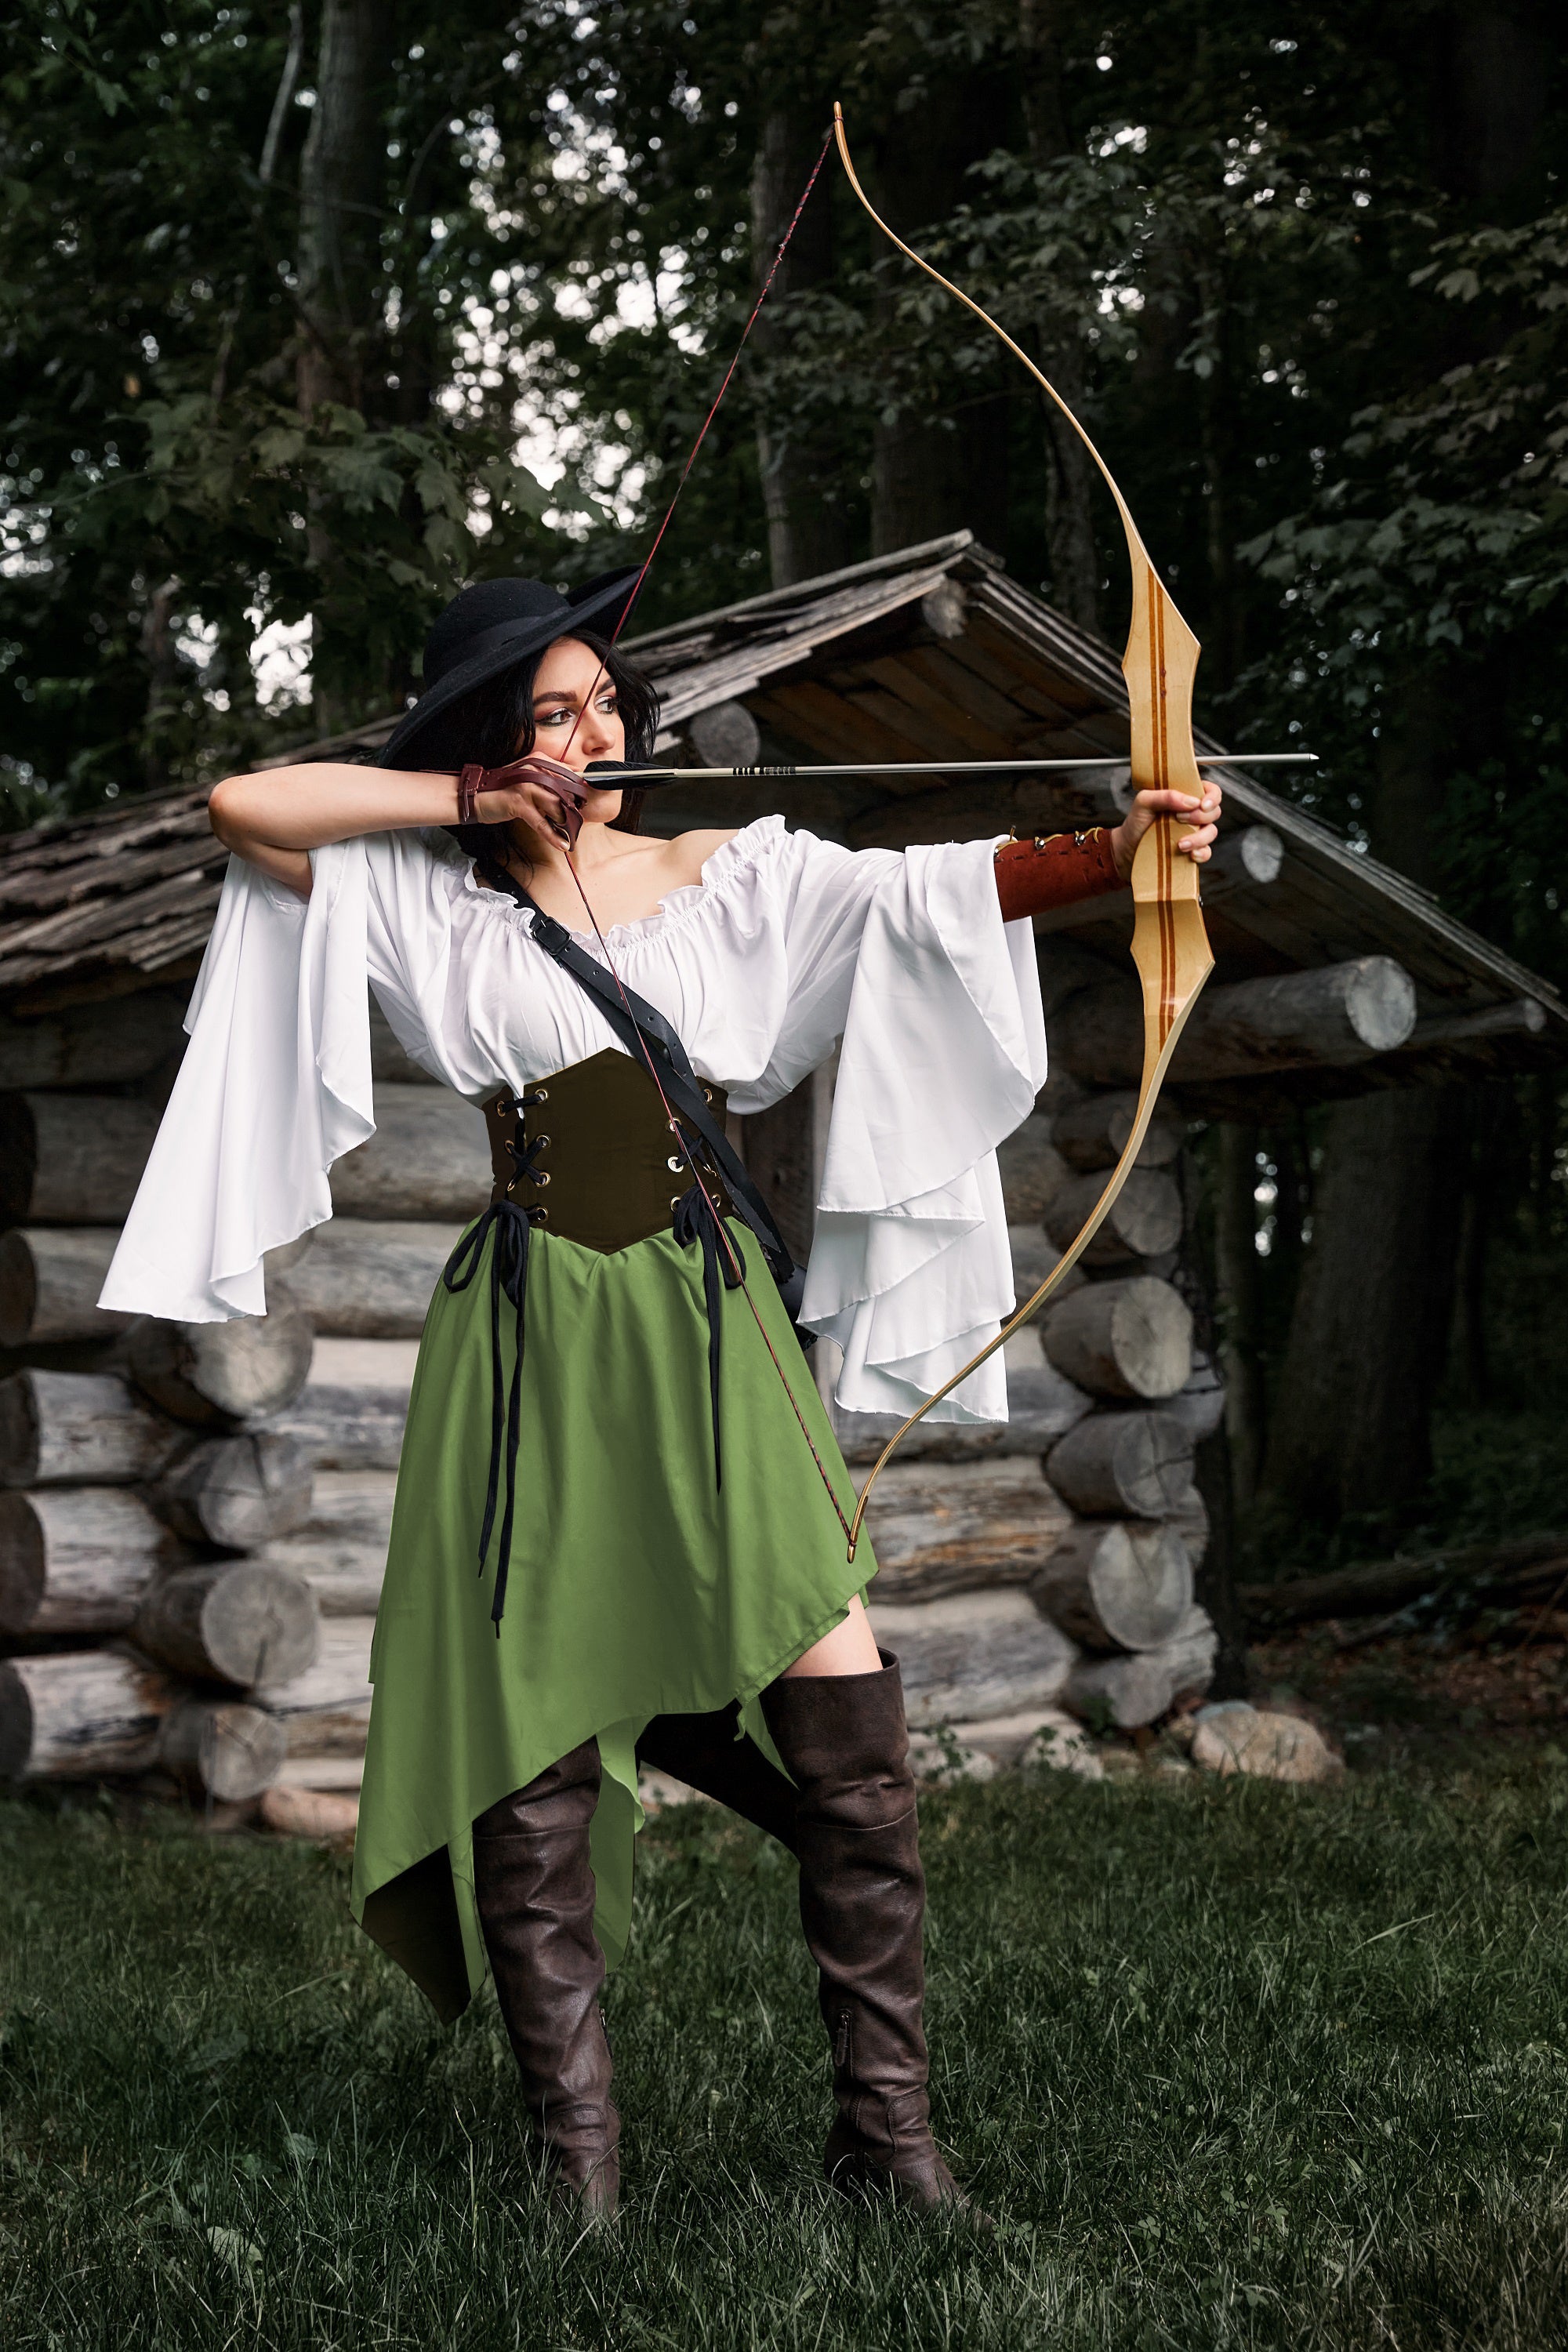 THE HUNTRESS Renaissance Medieval Cosplay Costume 100% Cotton in Sage 4 Pt. Skirt and Brown Cincher